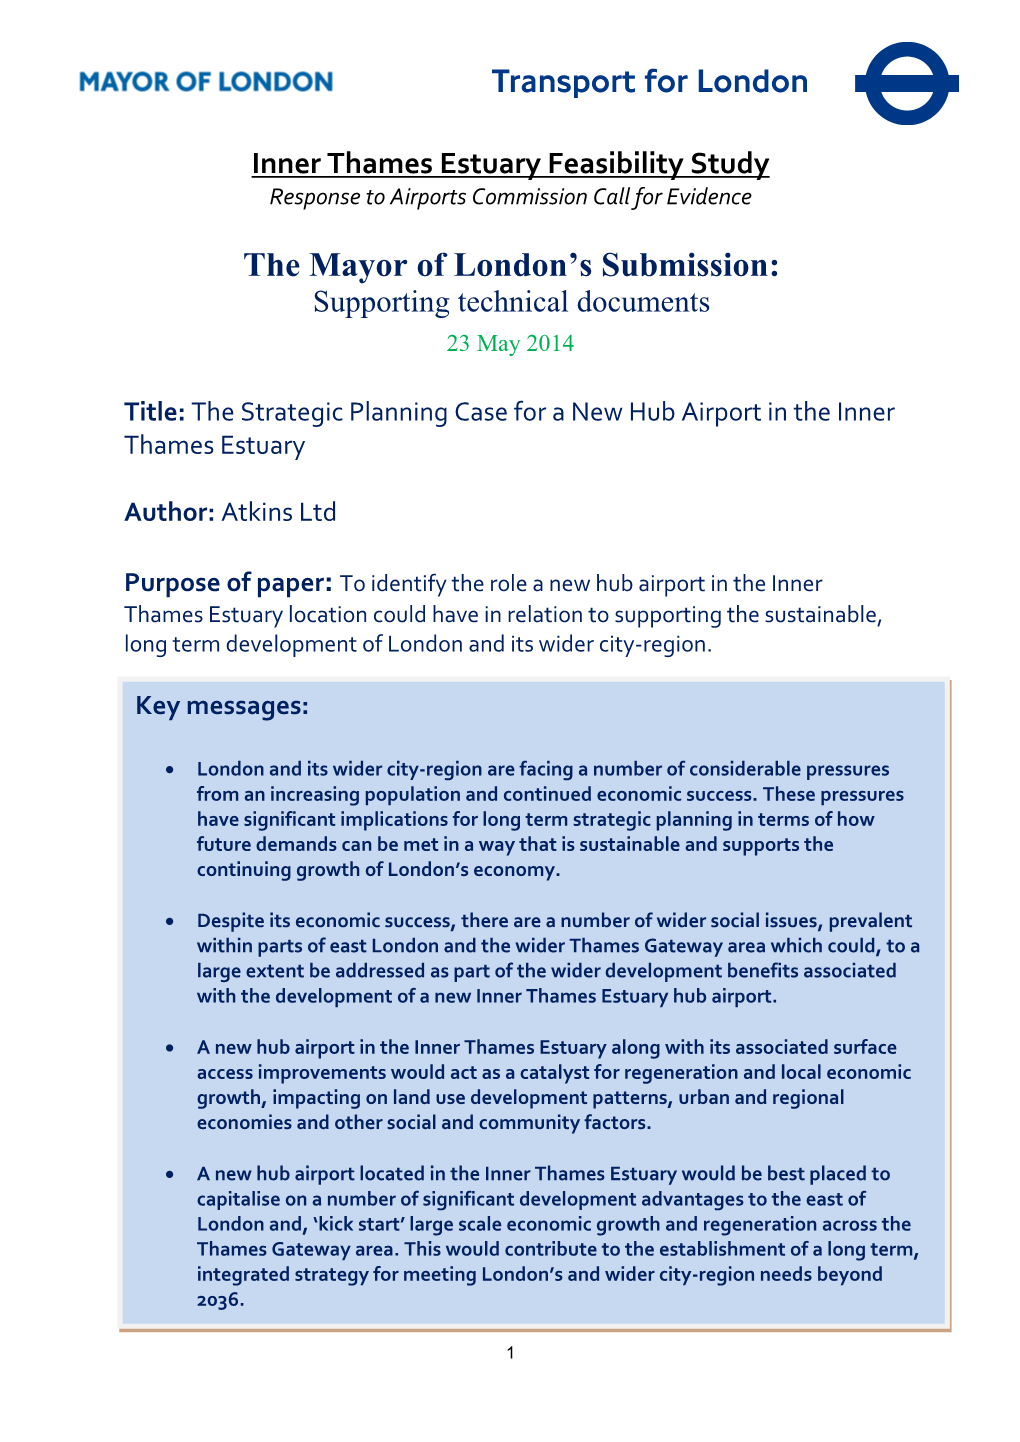 Inner Thames Estuary Feasibility Study Response to Airports Commission Call for Evidence